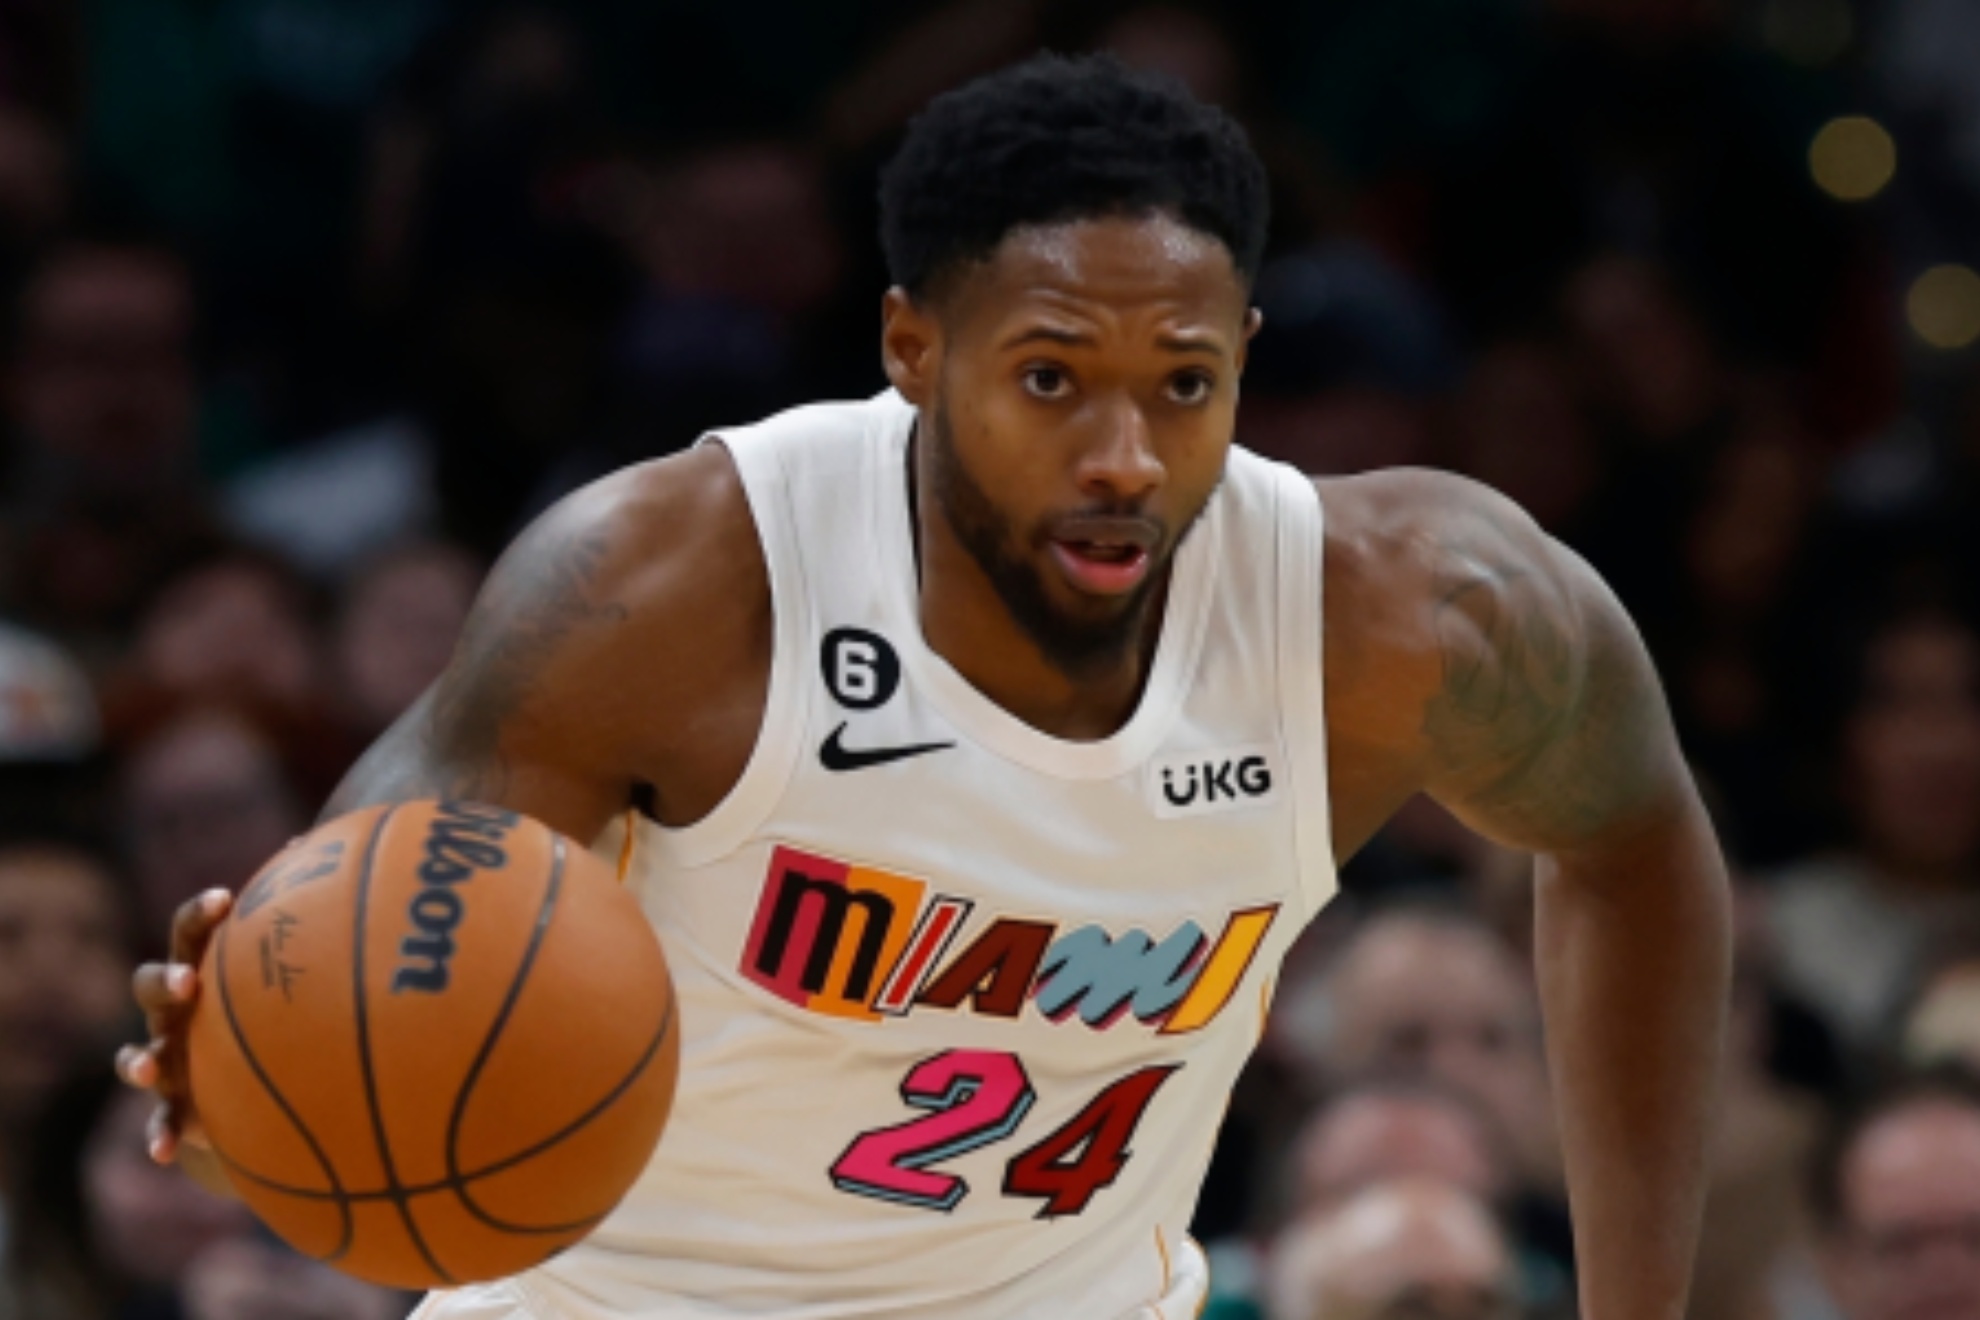 Miami Heats Haywood Highsmith was involved in a car accident after the teams game against the Orlando Magic